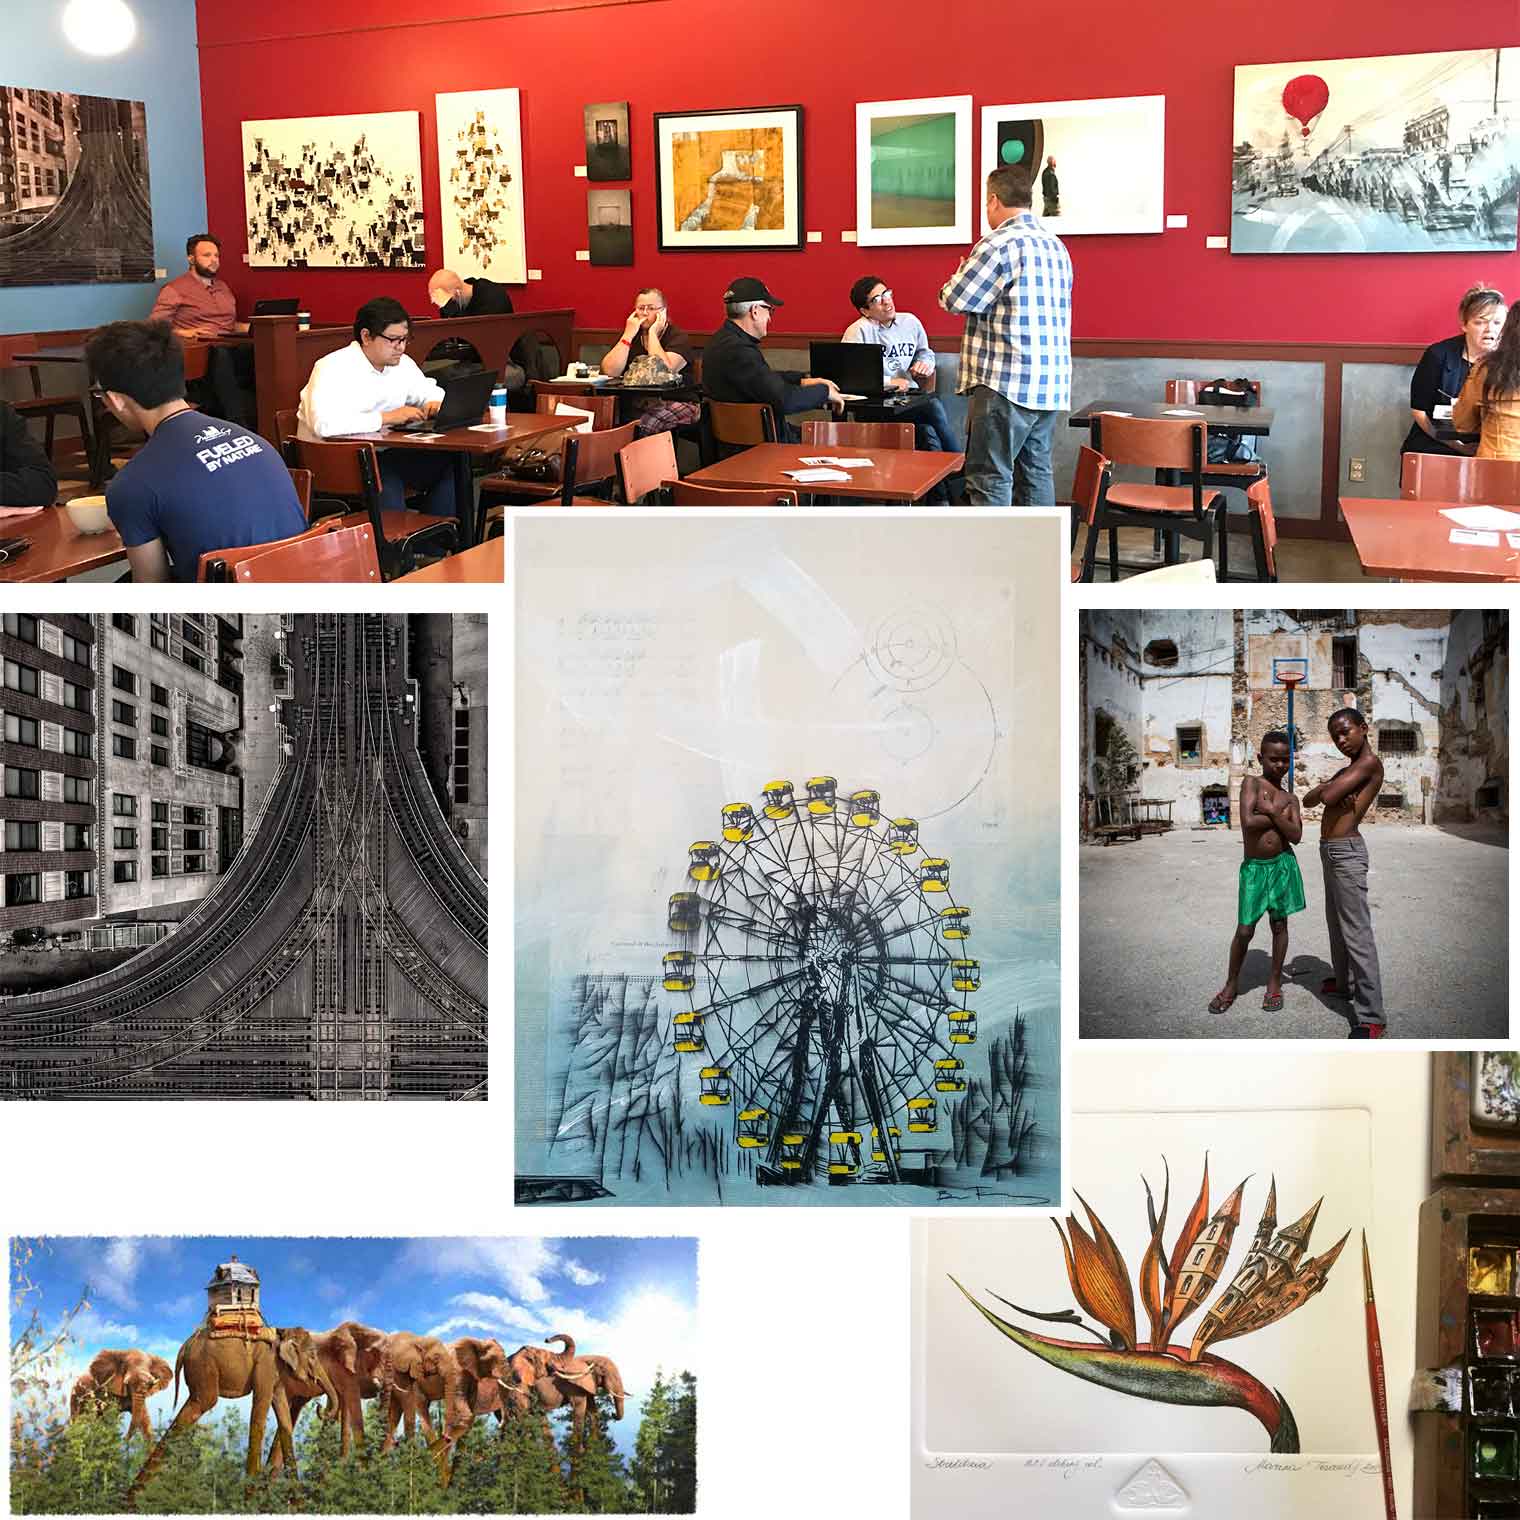 CLOCKWISE FROM TOP: Chaden at DMAFcurated "Recalling Place" exhibit in its original location at Mars Cafe featuring 10 Festival artists; Henri's "Us vs. Everybody"; Terauds' Strelitzia, Leben's Parade; Menaker's Lake and Wells; CENTER: Frey's "Around Again"